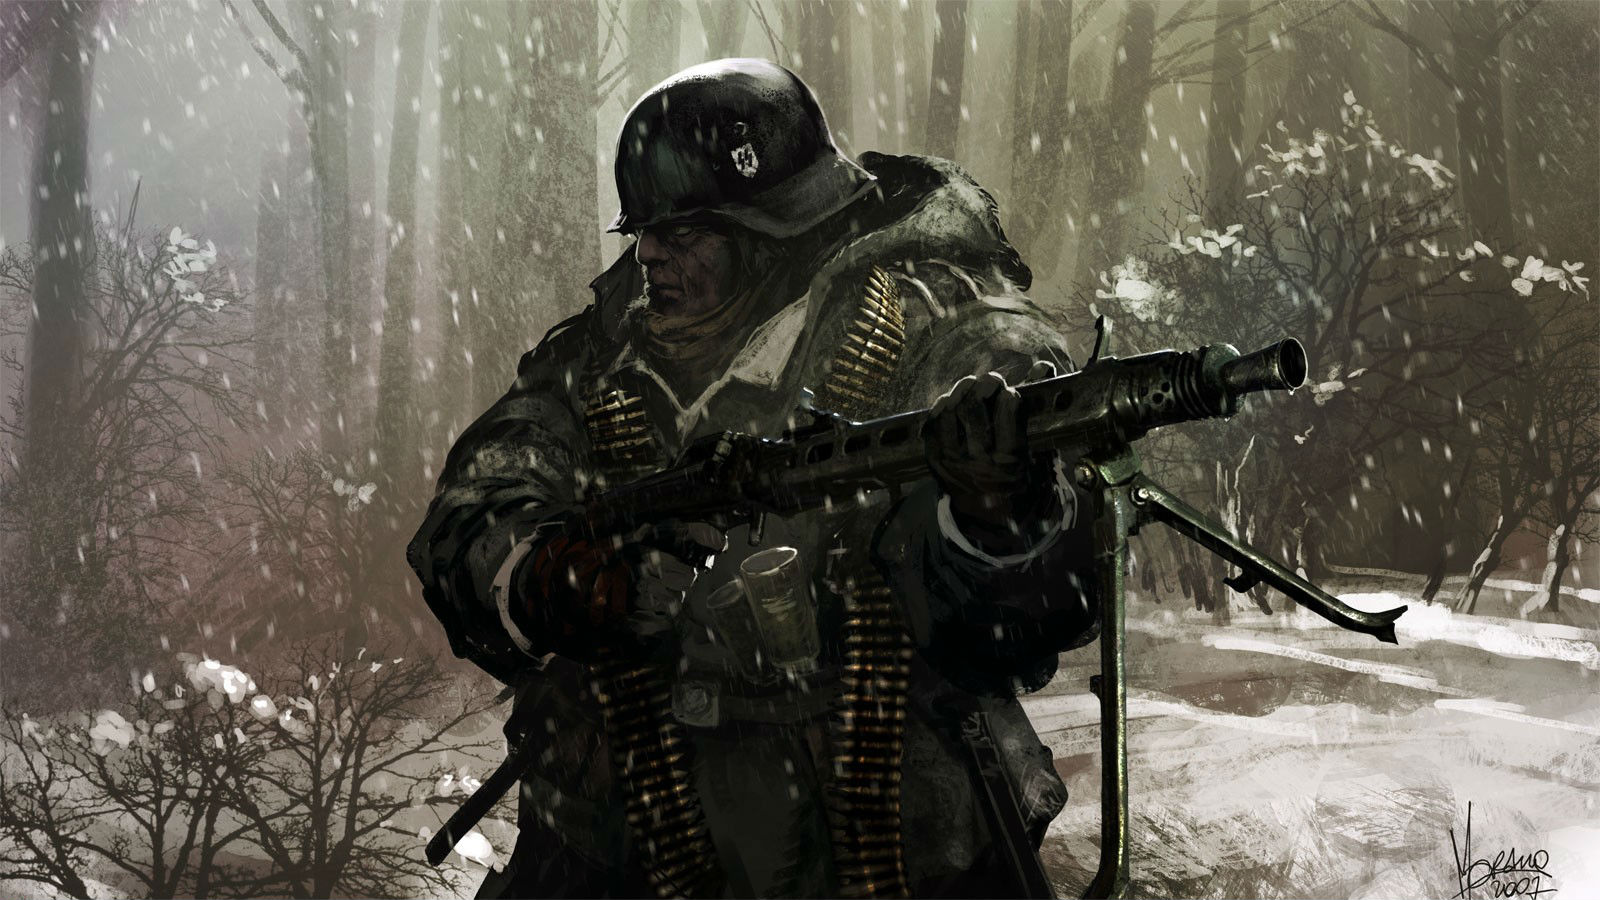 nazi, Soldier, Battle, Weapons, Weapon, Military, Winter, Snow Wallpaper